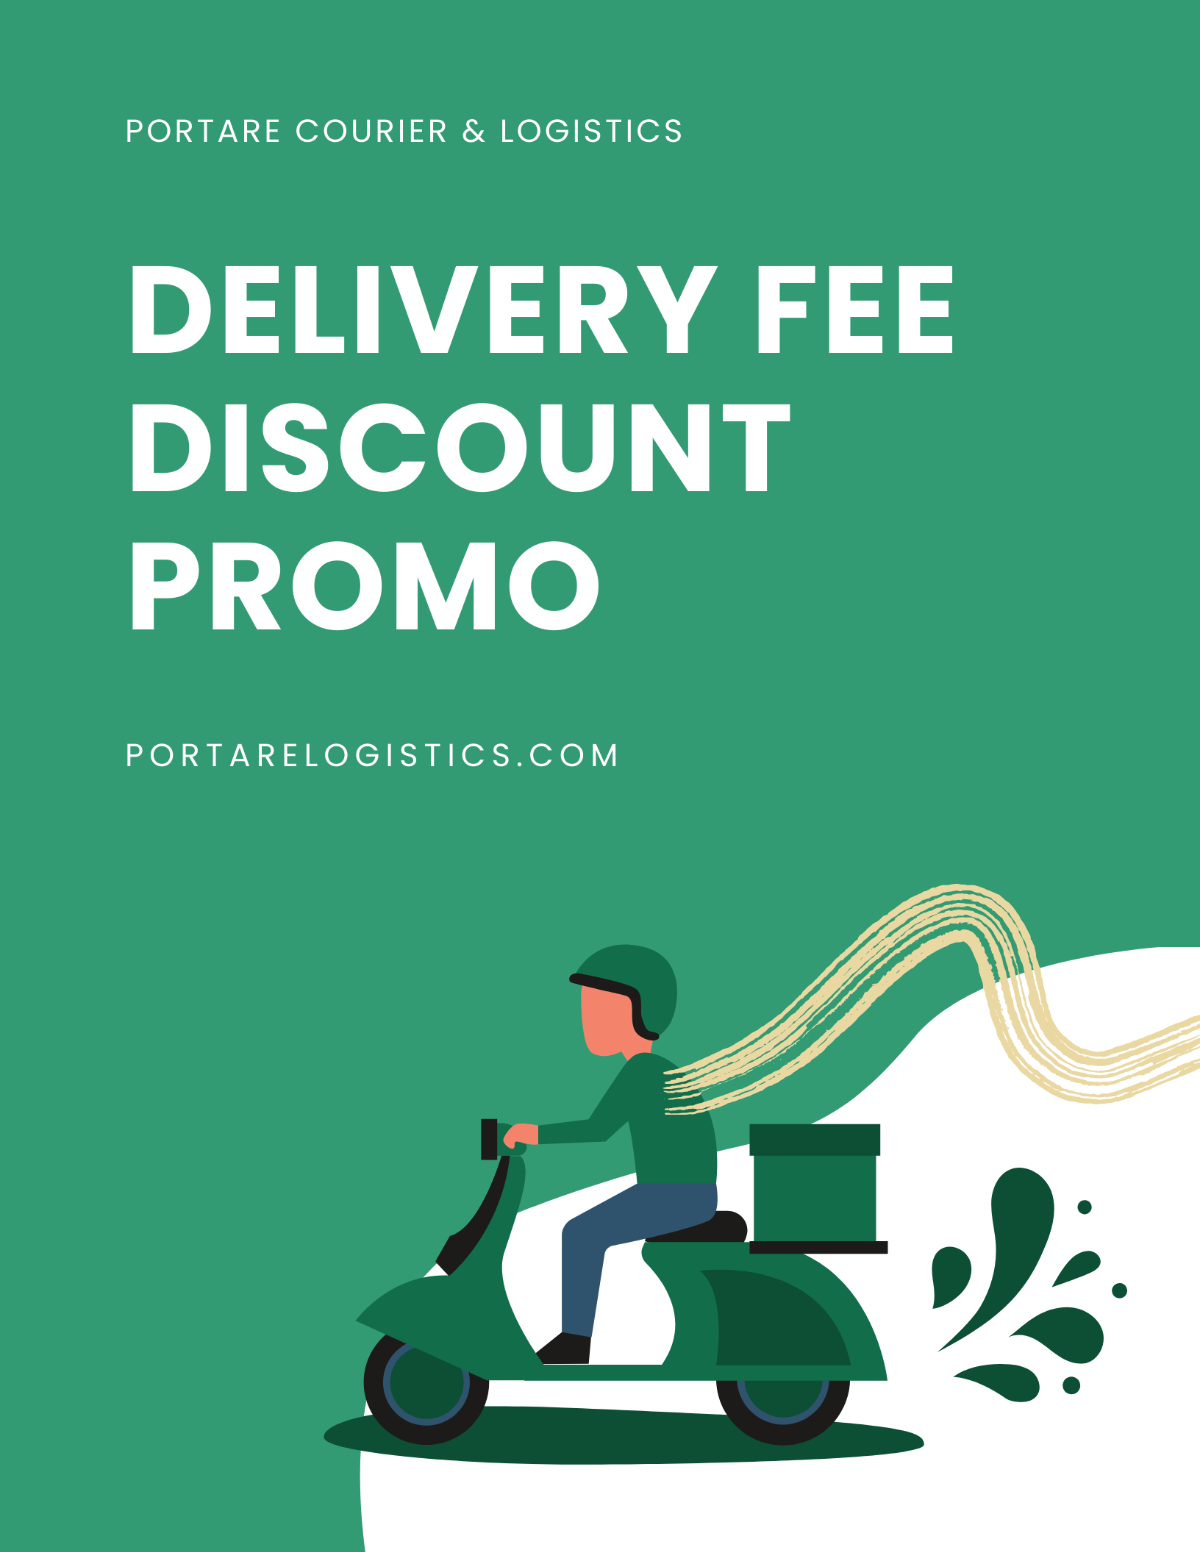 Free Delivery Promo Flyer Template